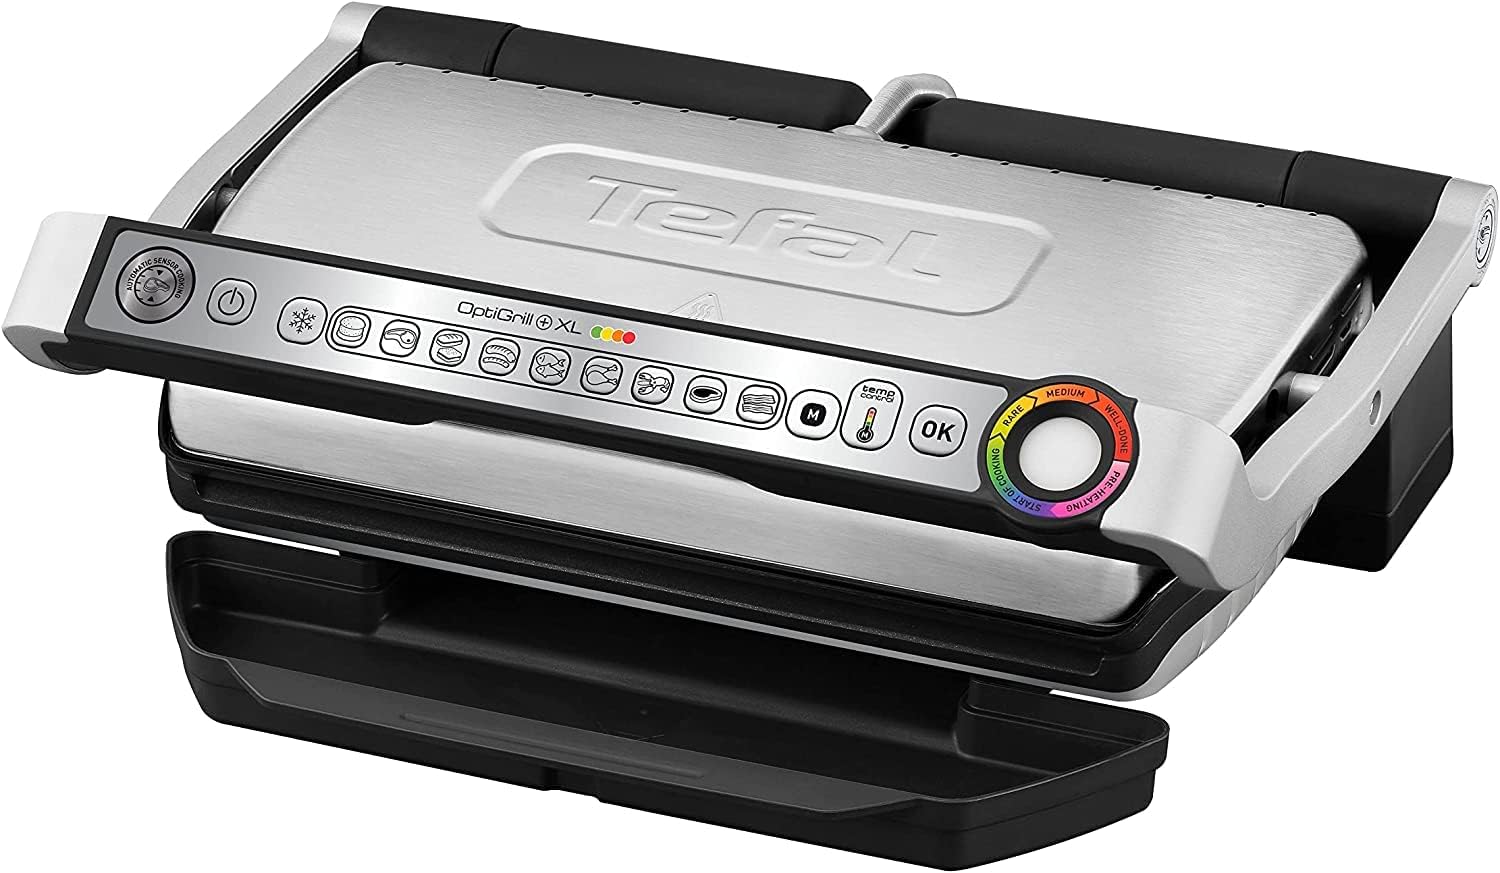 Tefal GC722D Optigrill+ XL Contact Grill, Includes Recipe Book, 9 Intelligent Programs, 4 Temperatures Levels, Display of Cooking State, Dishwasher Safe Plates 900 cm², Stainless Steel/Black